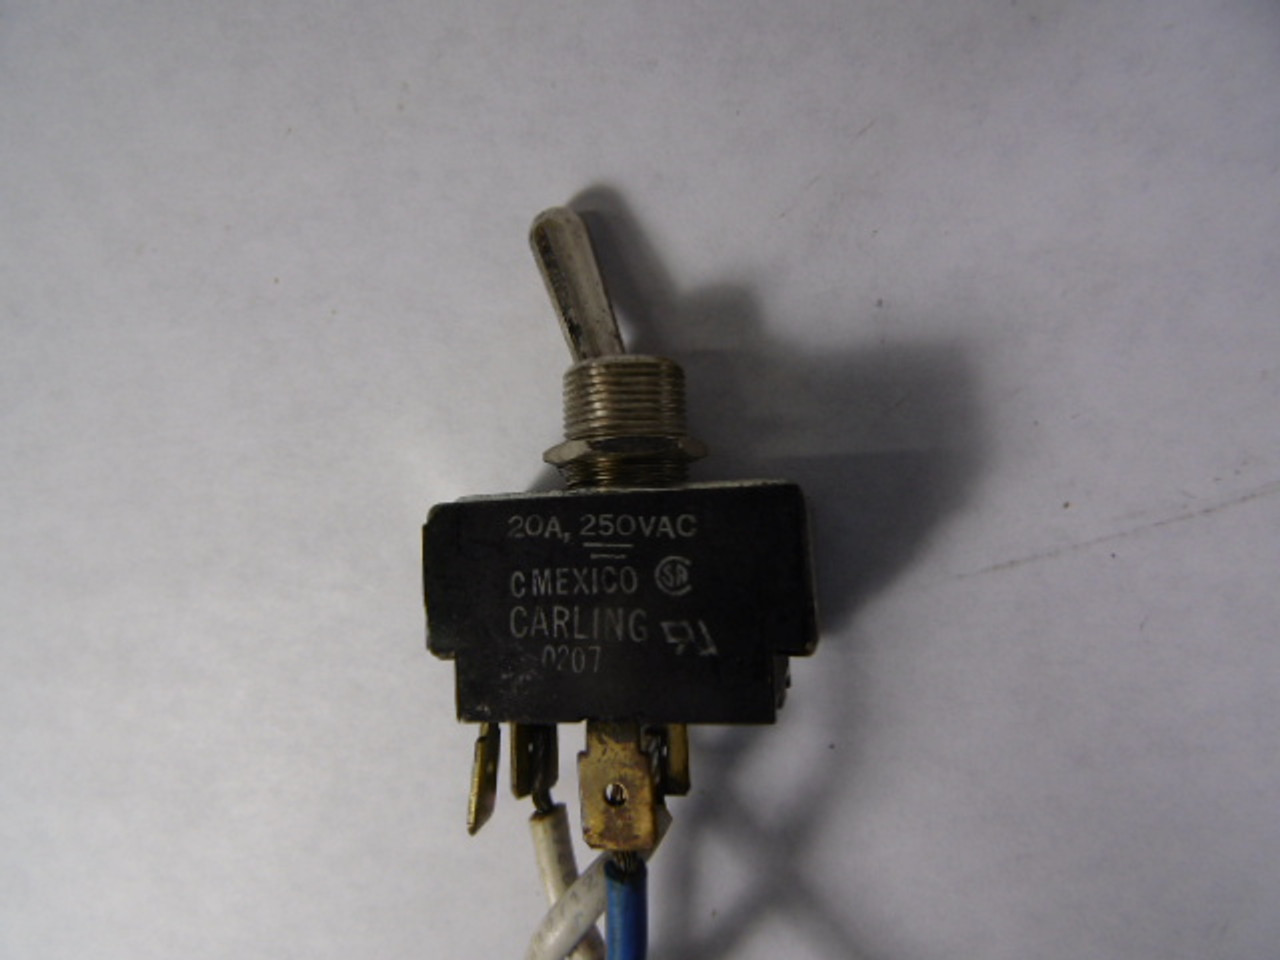 Carling 0207 Toggle Switch 20amp 250V USED